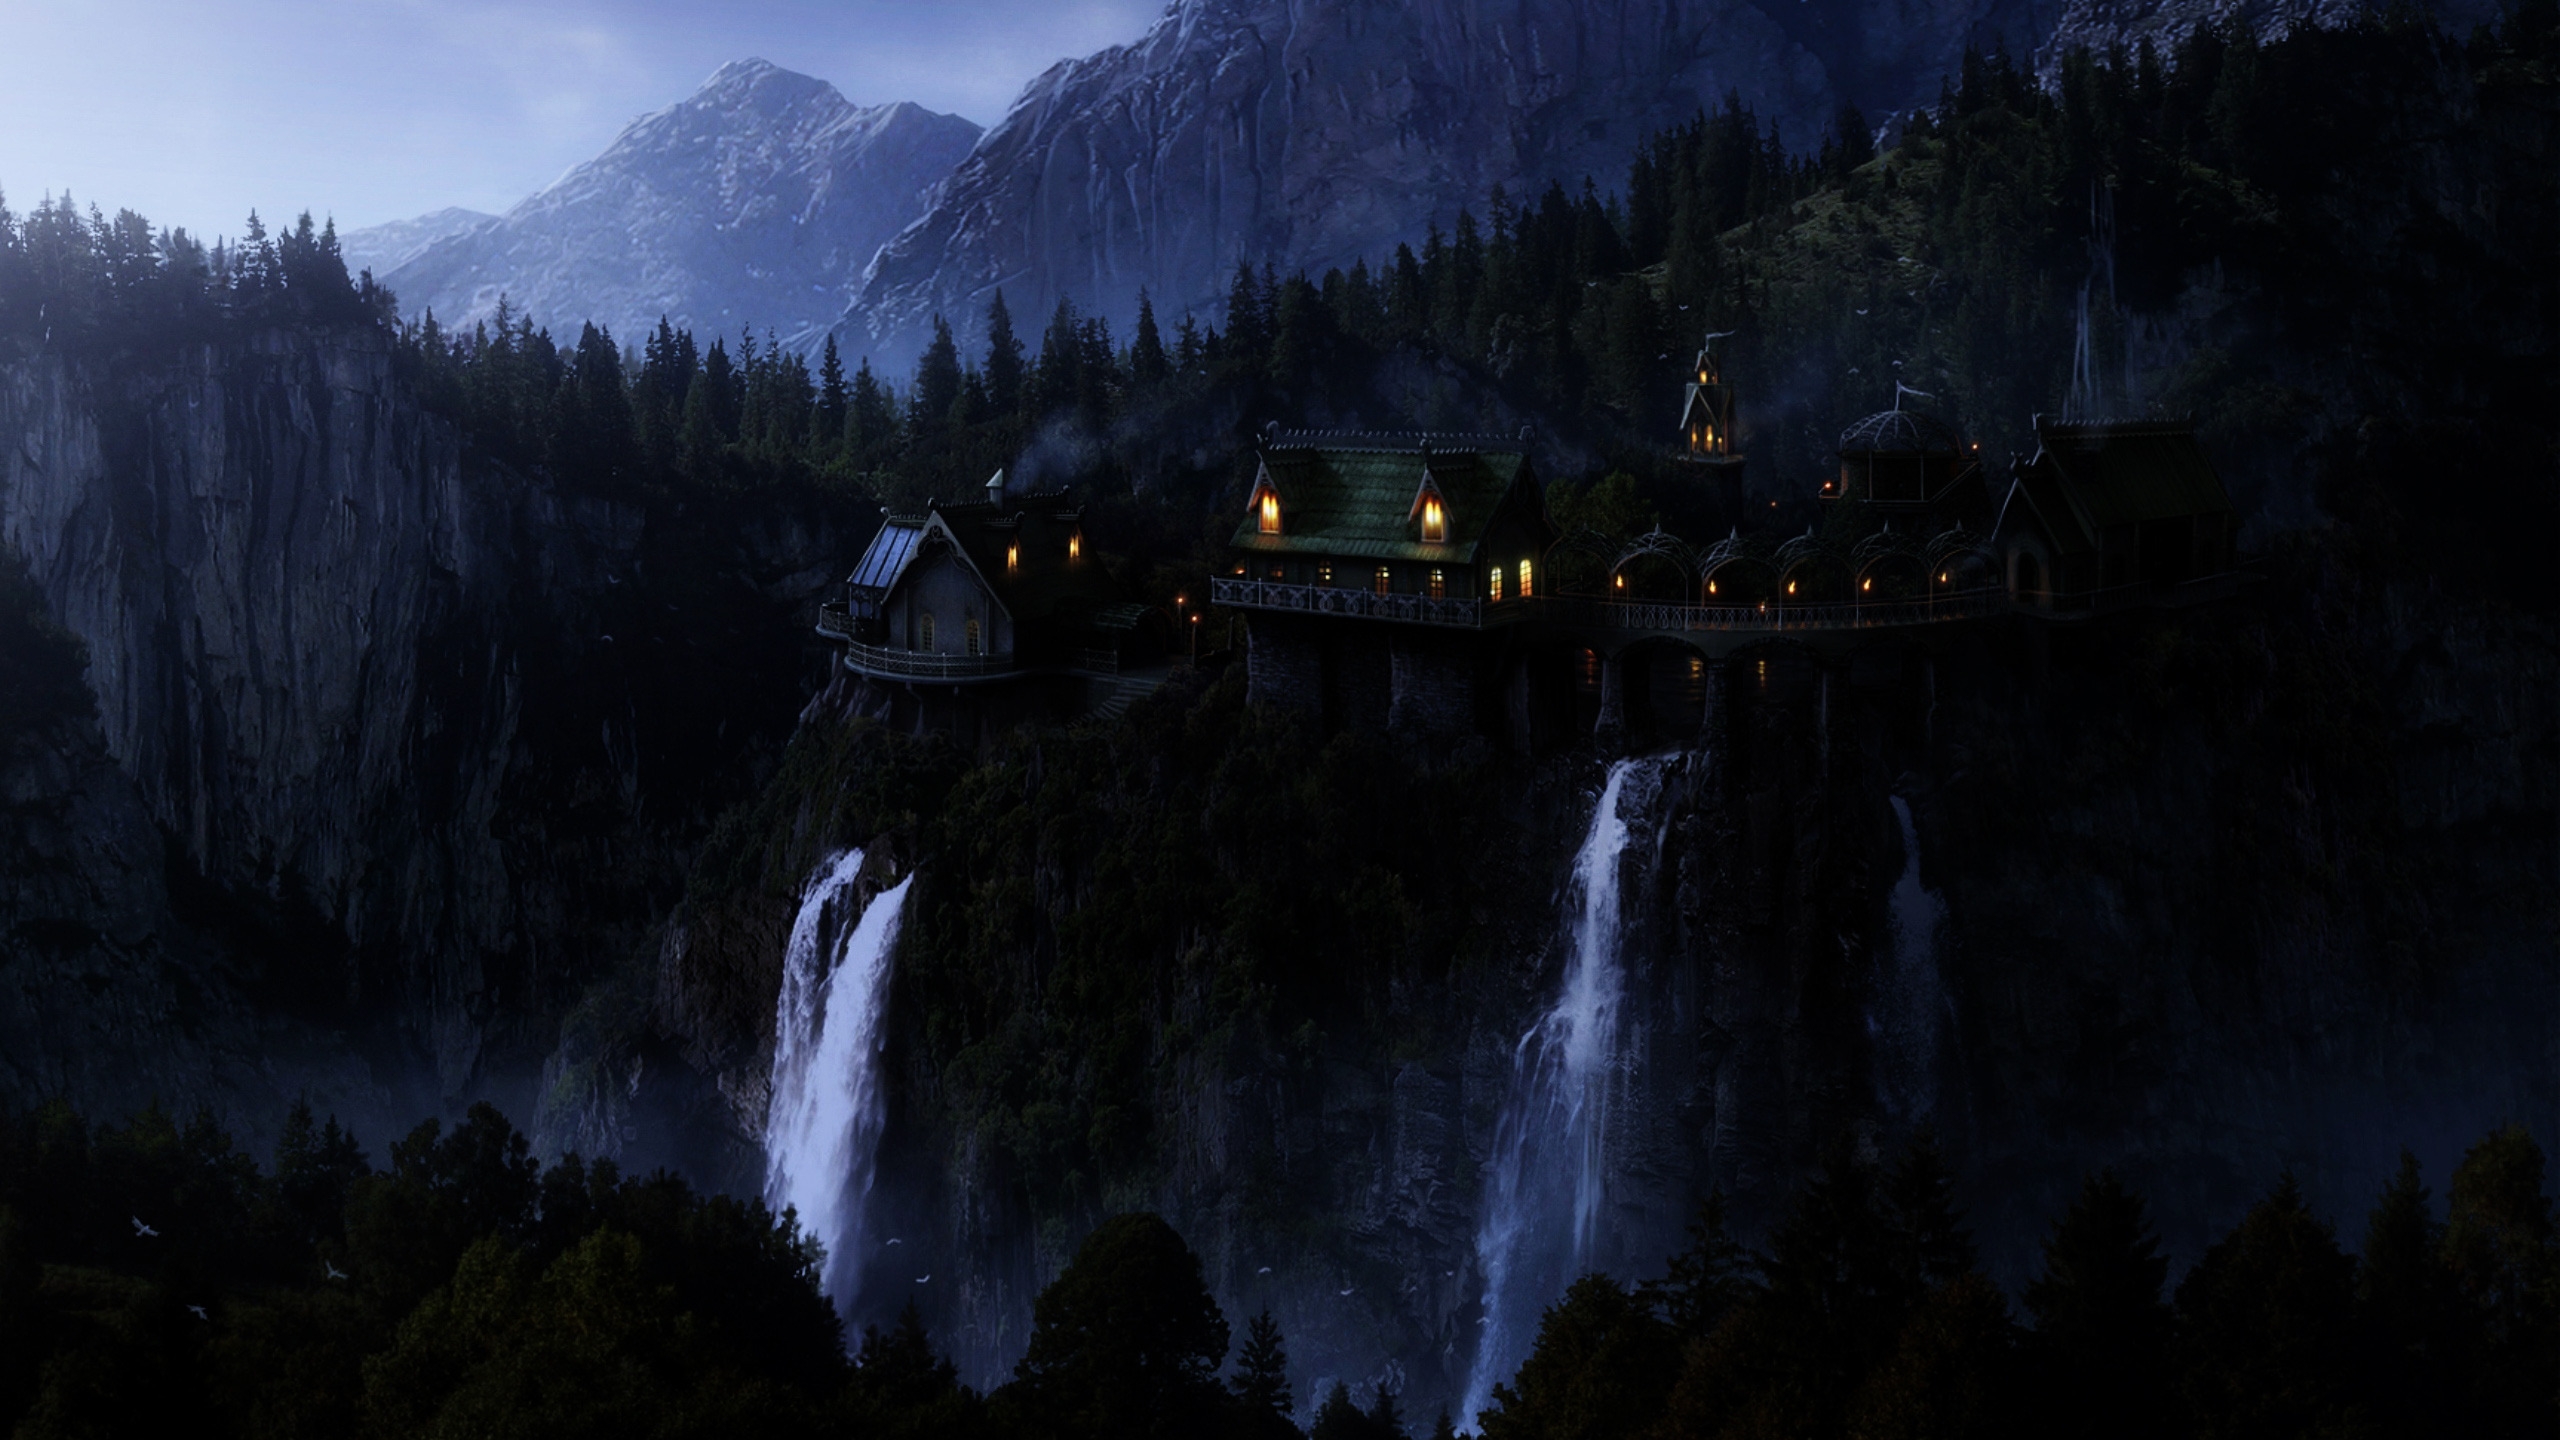 The Lord of the Rings Rivendell for 2560x1440 HDTV resolution